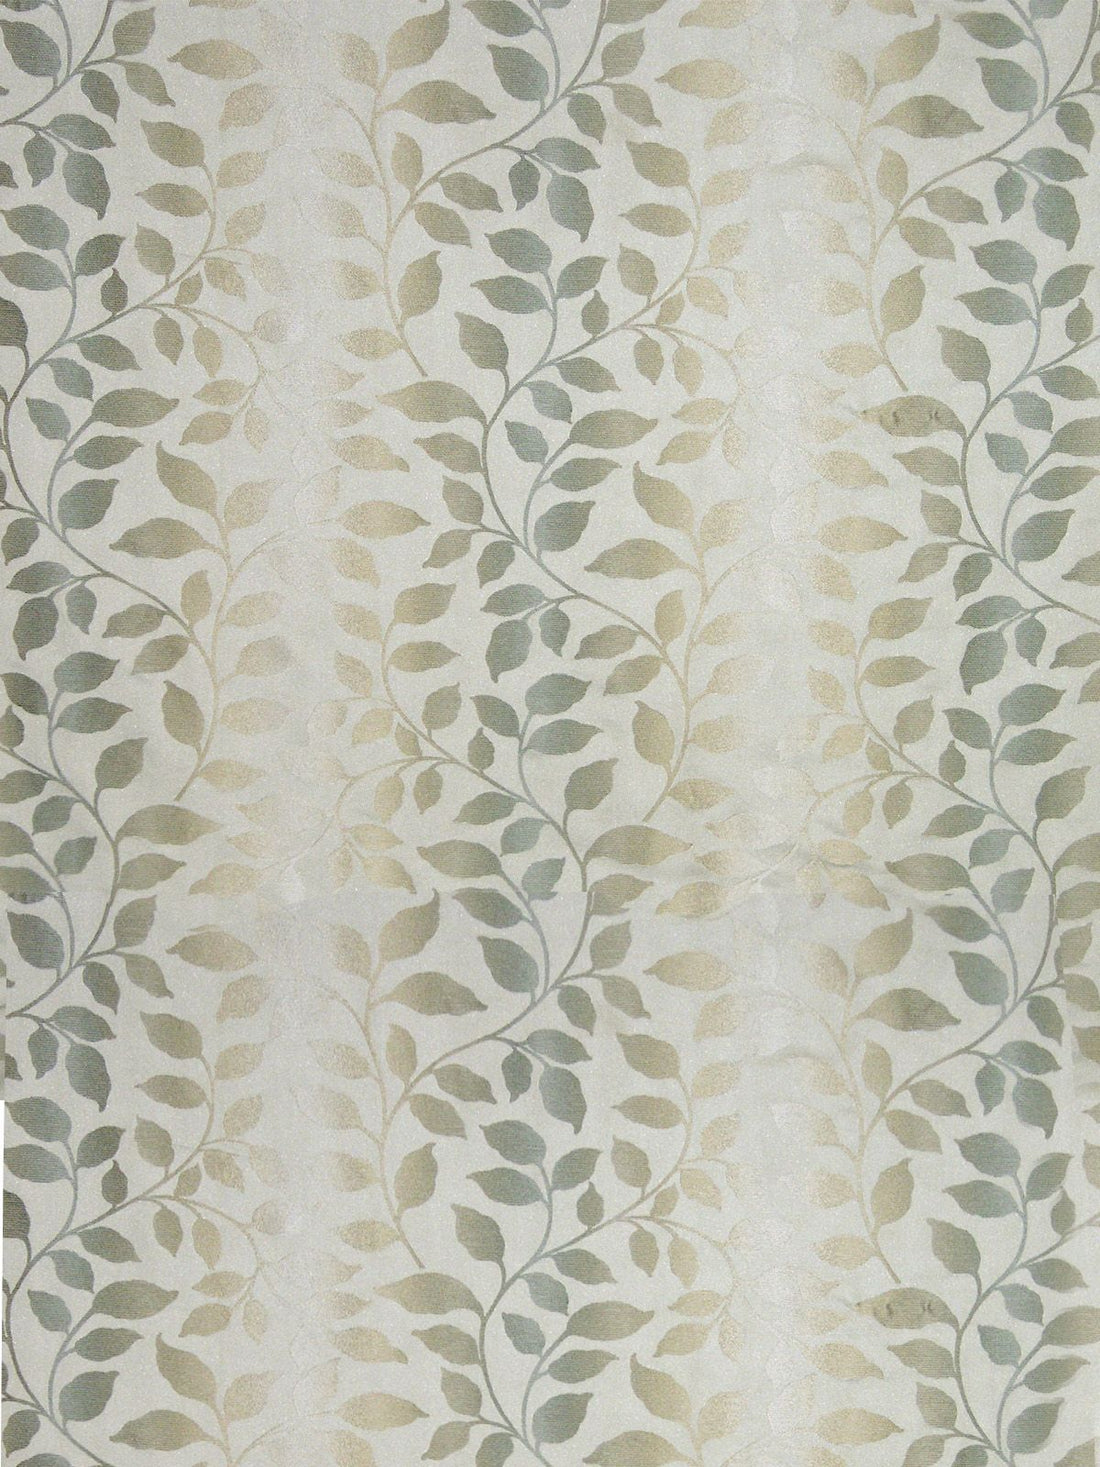 Vallen fabric in taupe color - pattern number JM 00033105 - by Scalamandre in the Old World Weavers collection